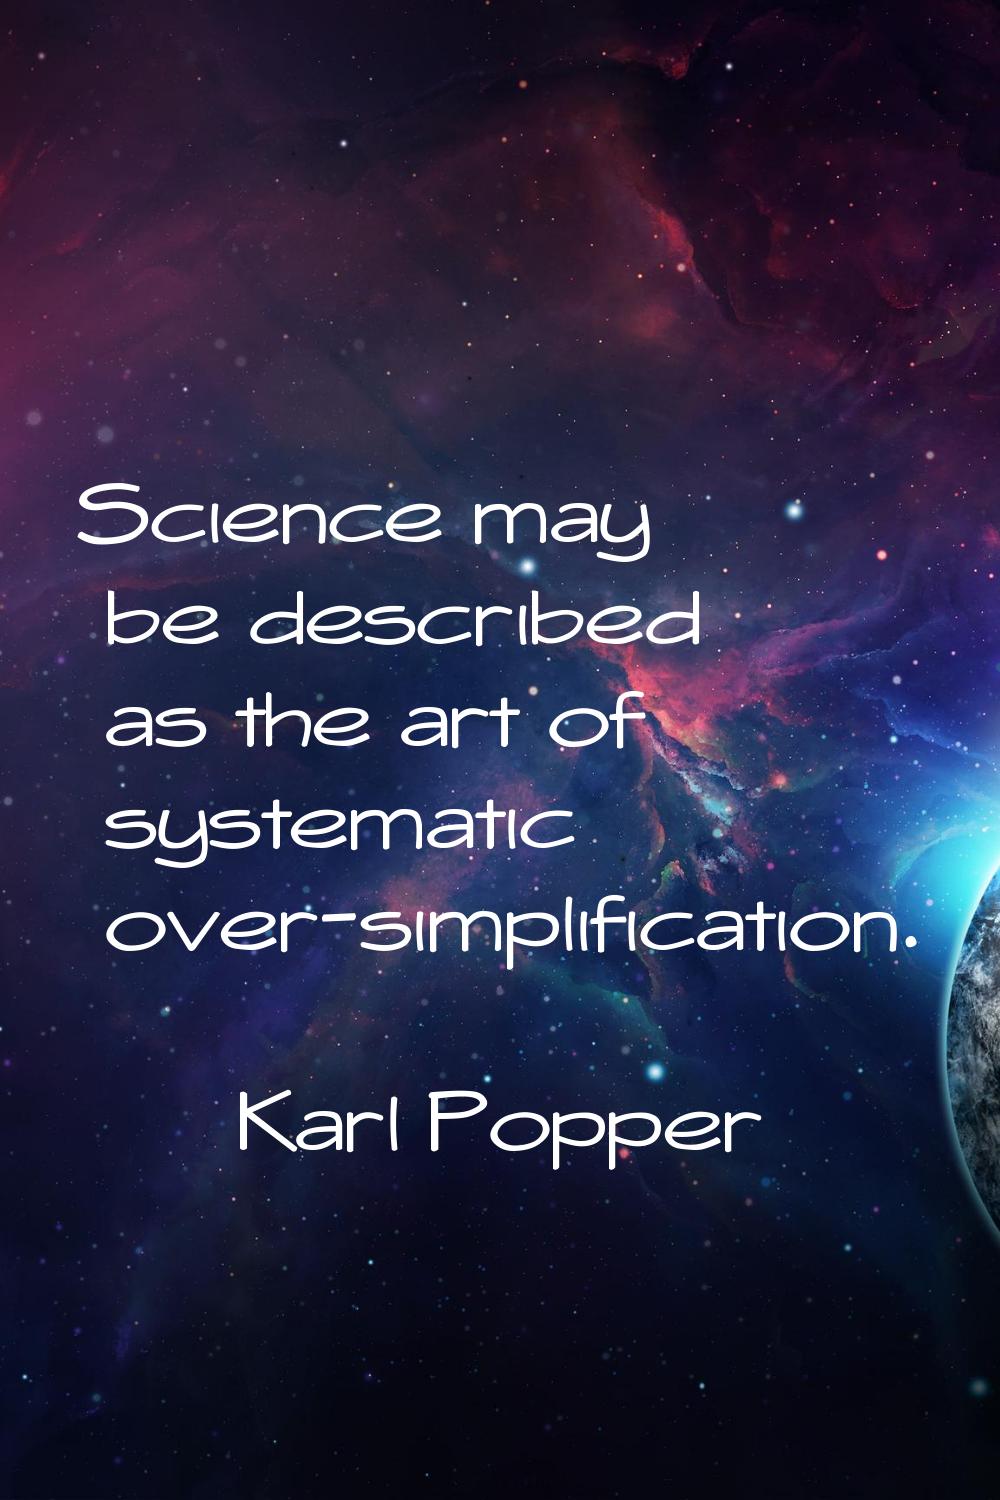 Science may be described as the art of systematic over-simplification.